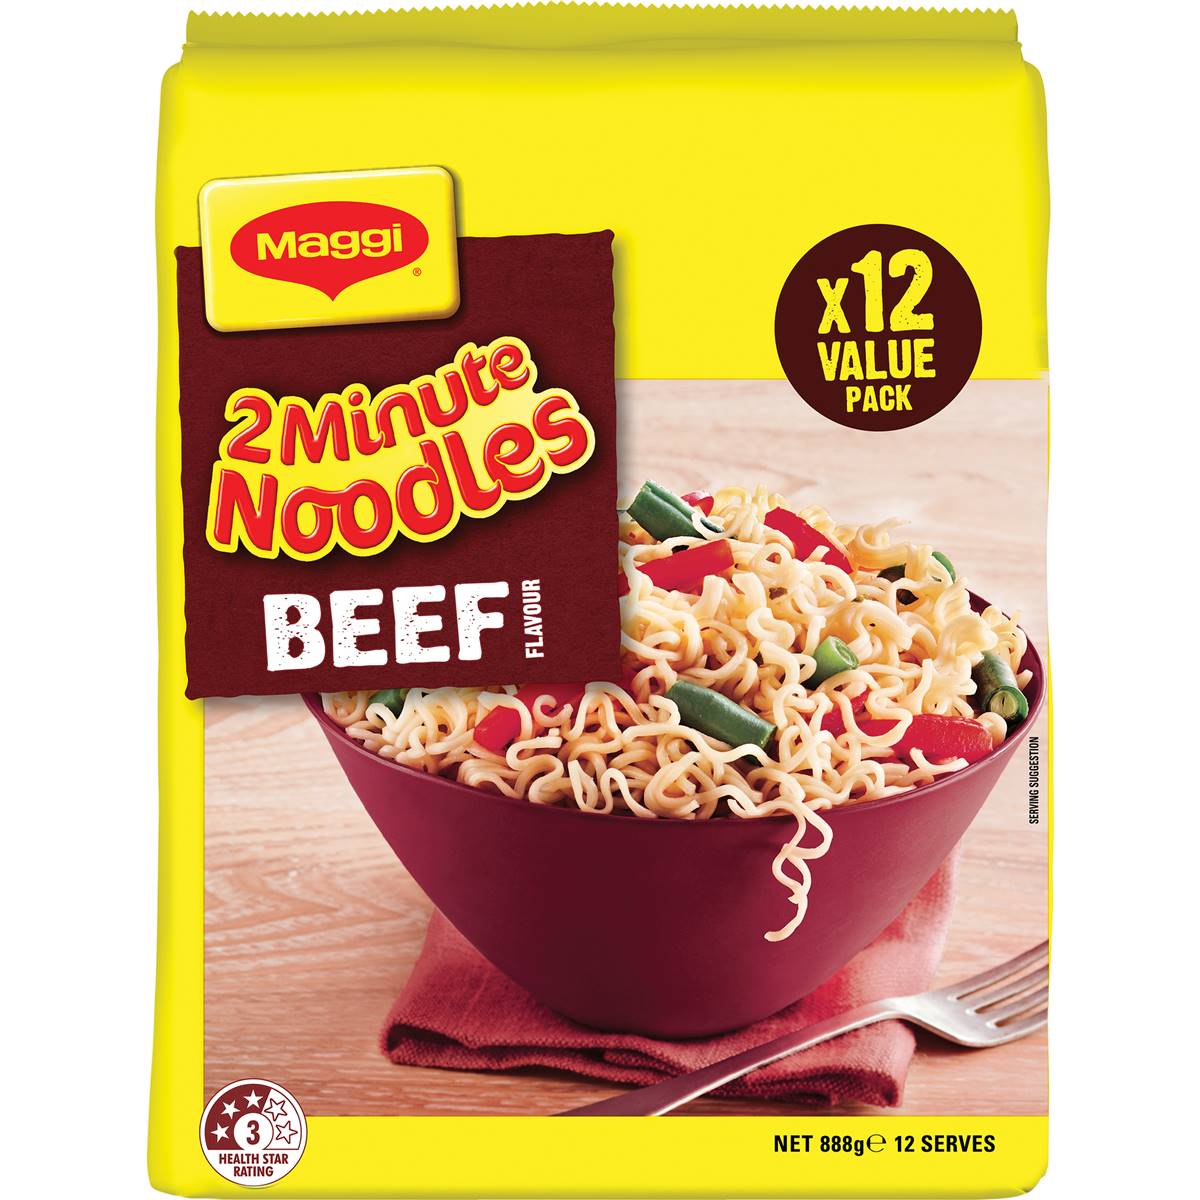 Maggi Beef 2 Minute Noodles Value Pack